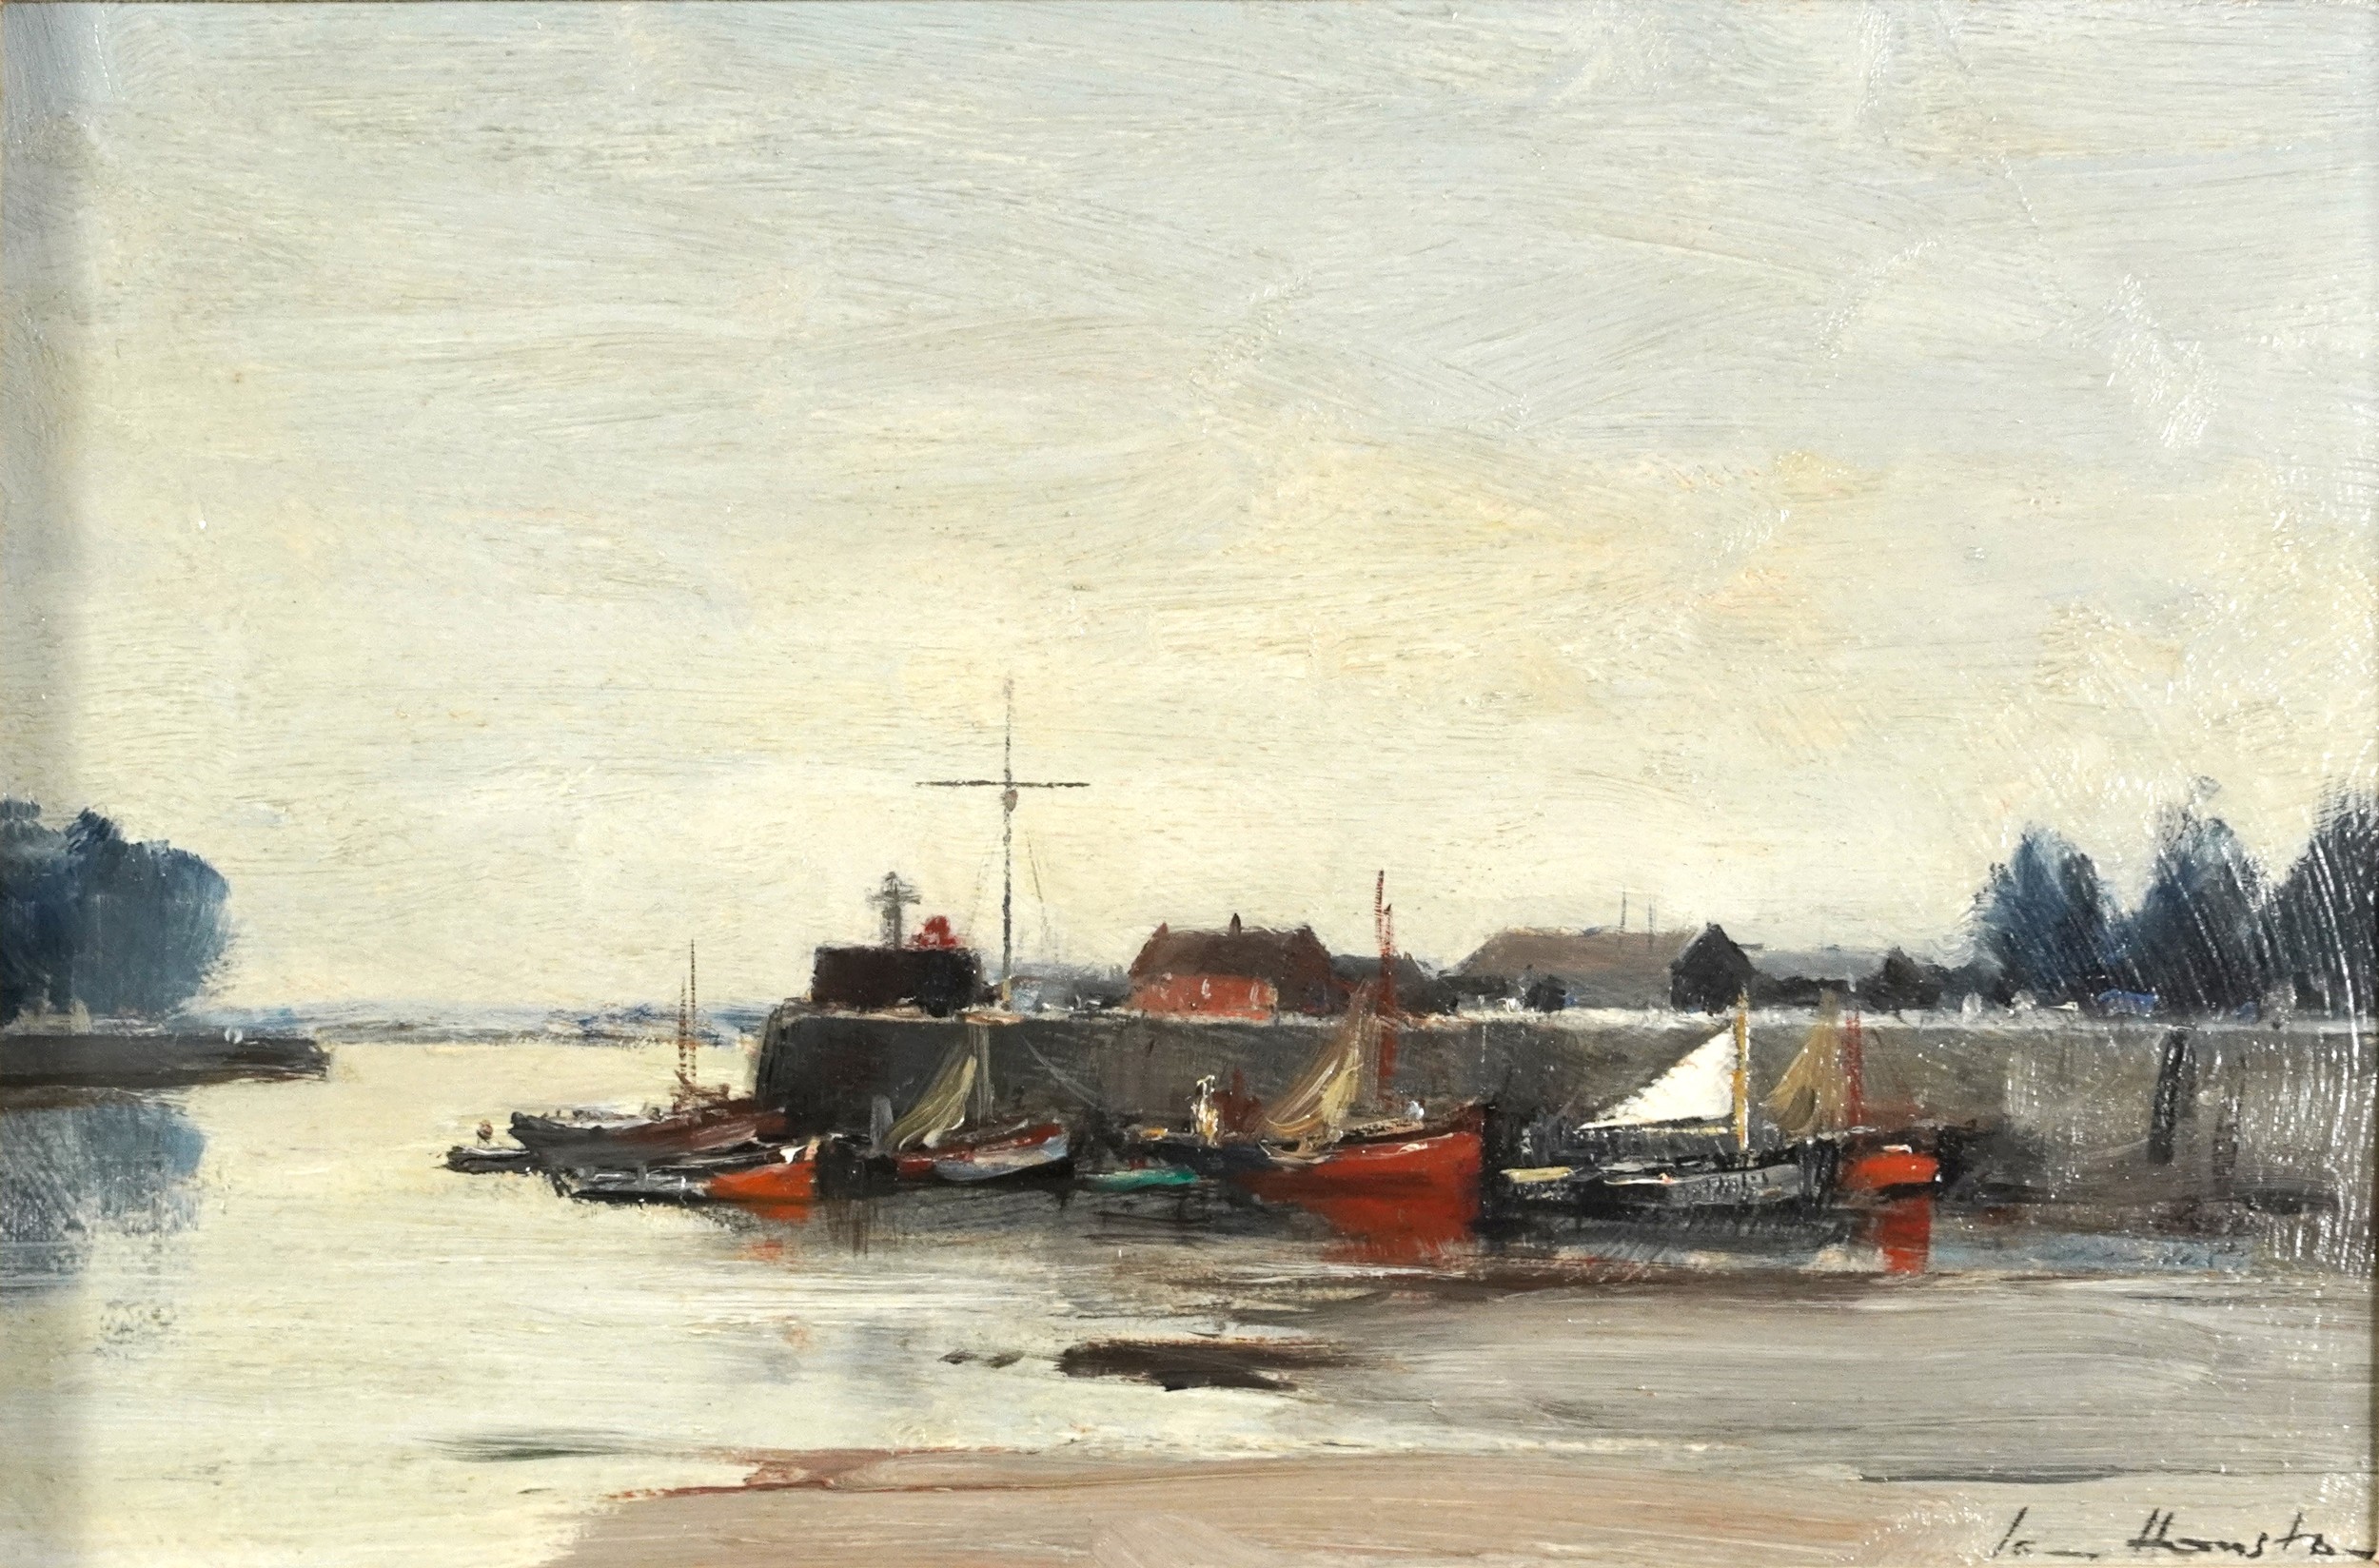 Ian Houston - Honfleur Harbour at low tide, Impressionist oil on board, chalk marks and inscribed